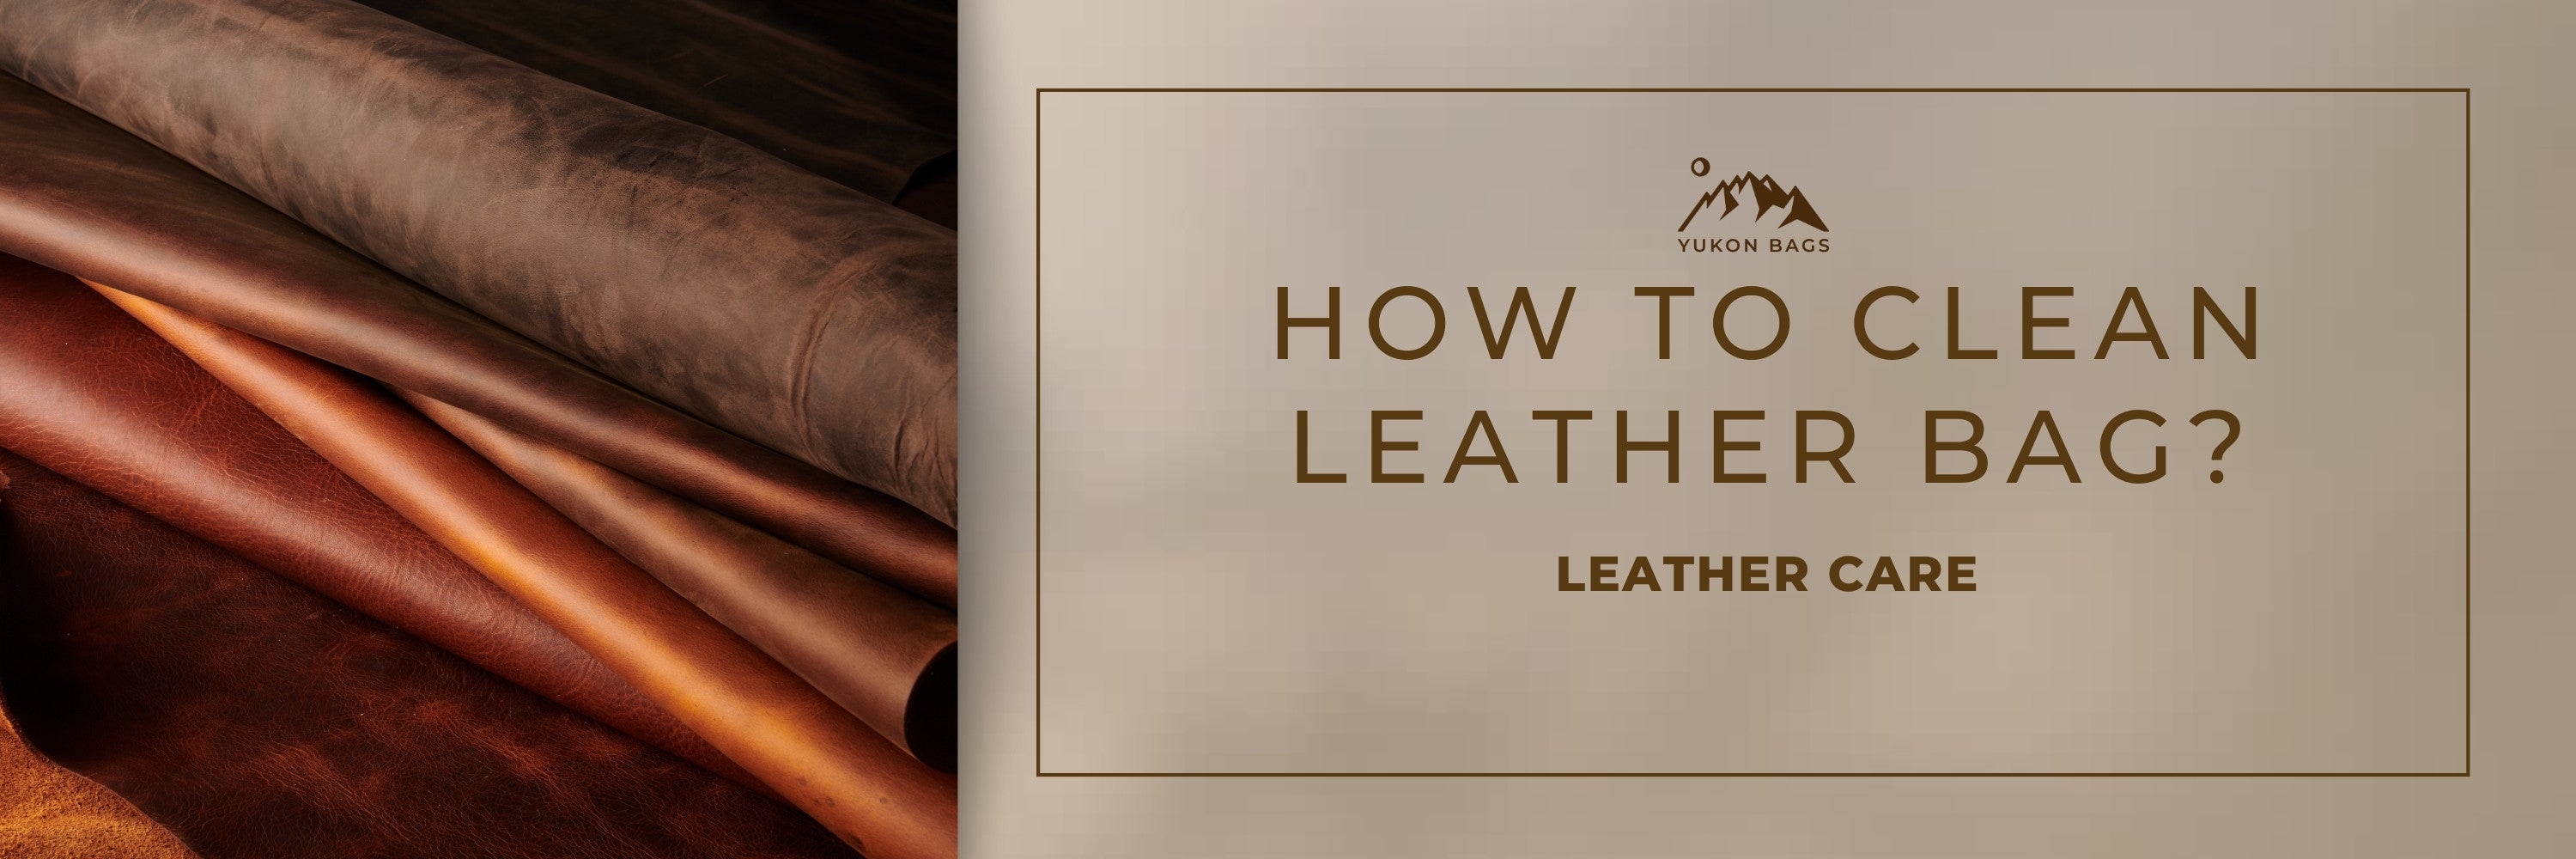 Leather Care Tips: How to Clean Leather Goods?